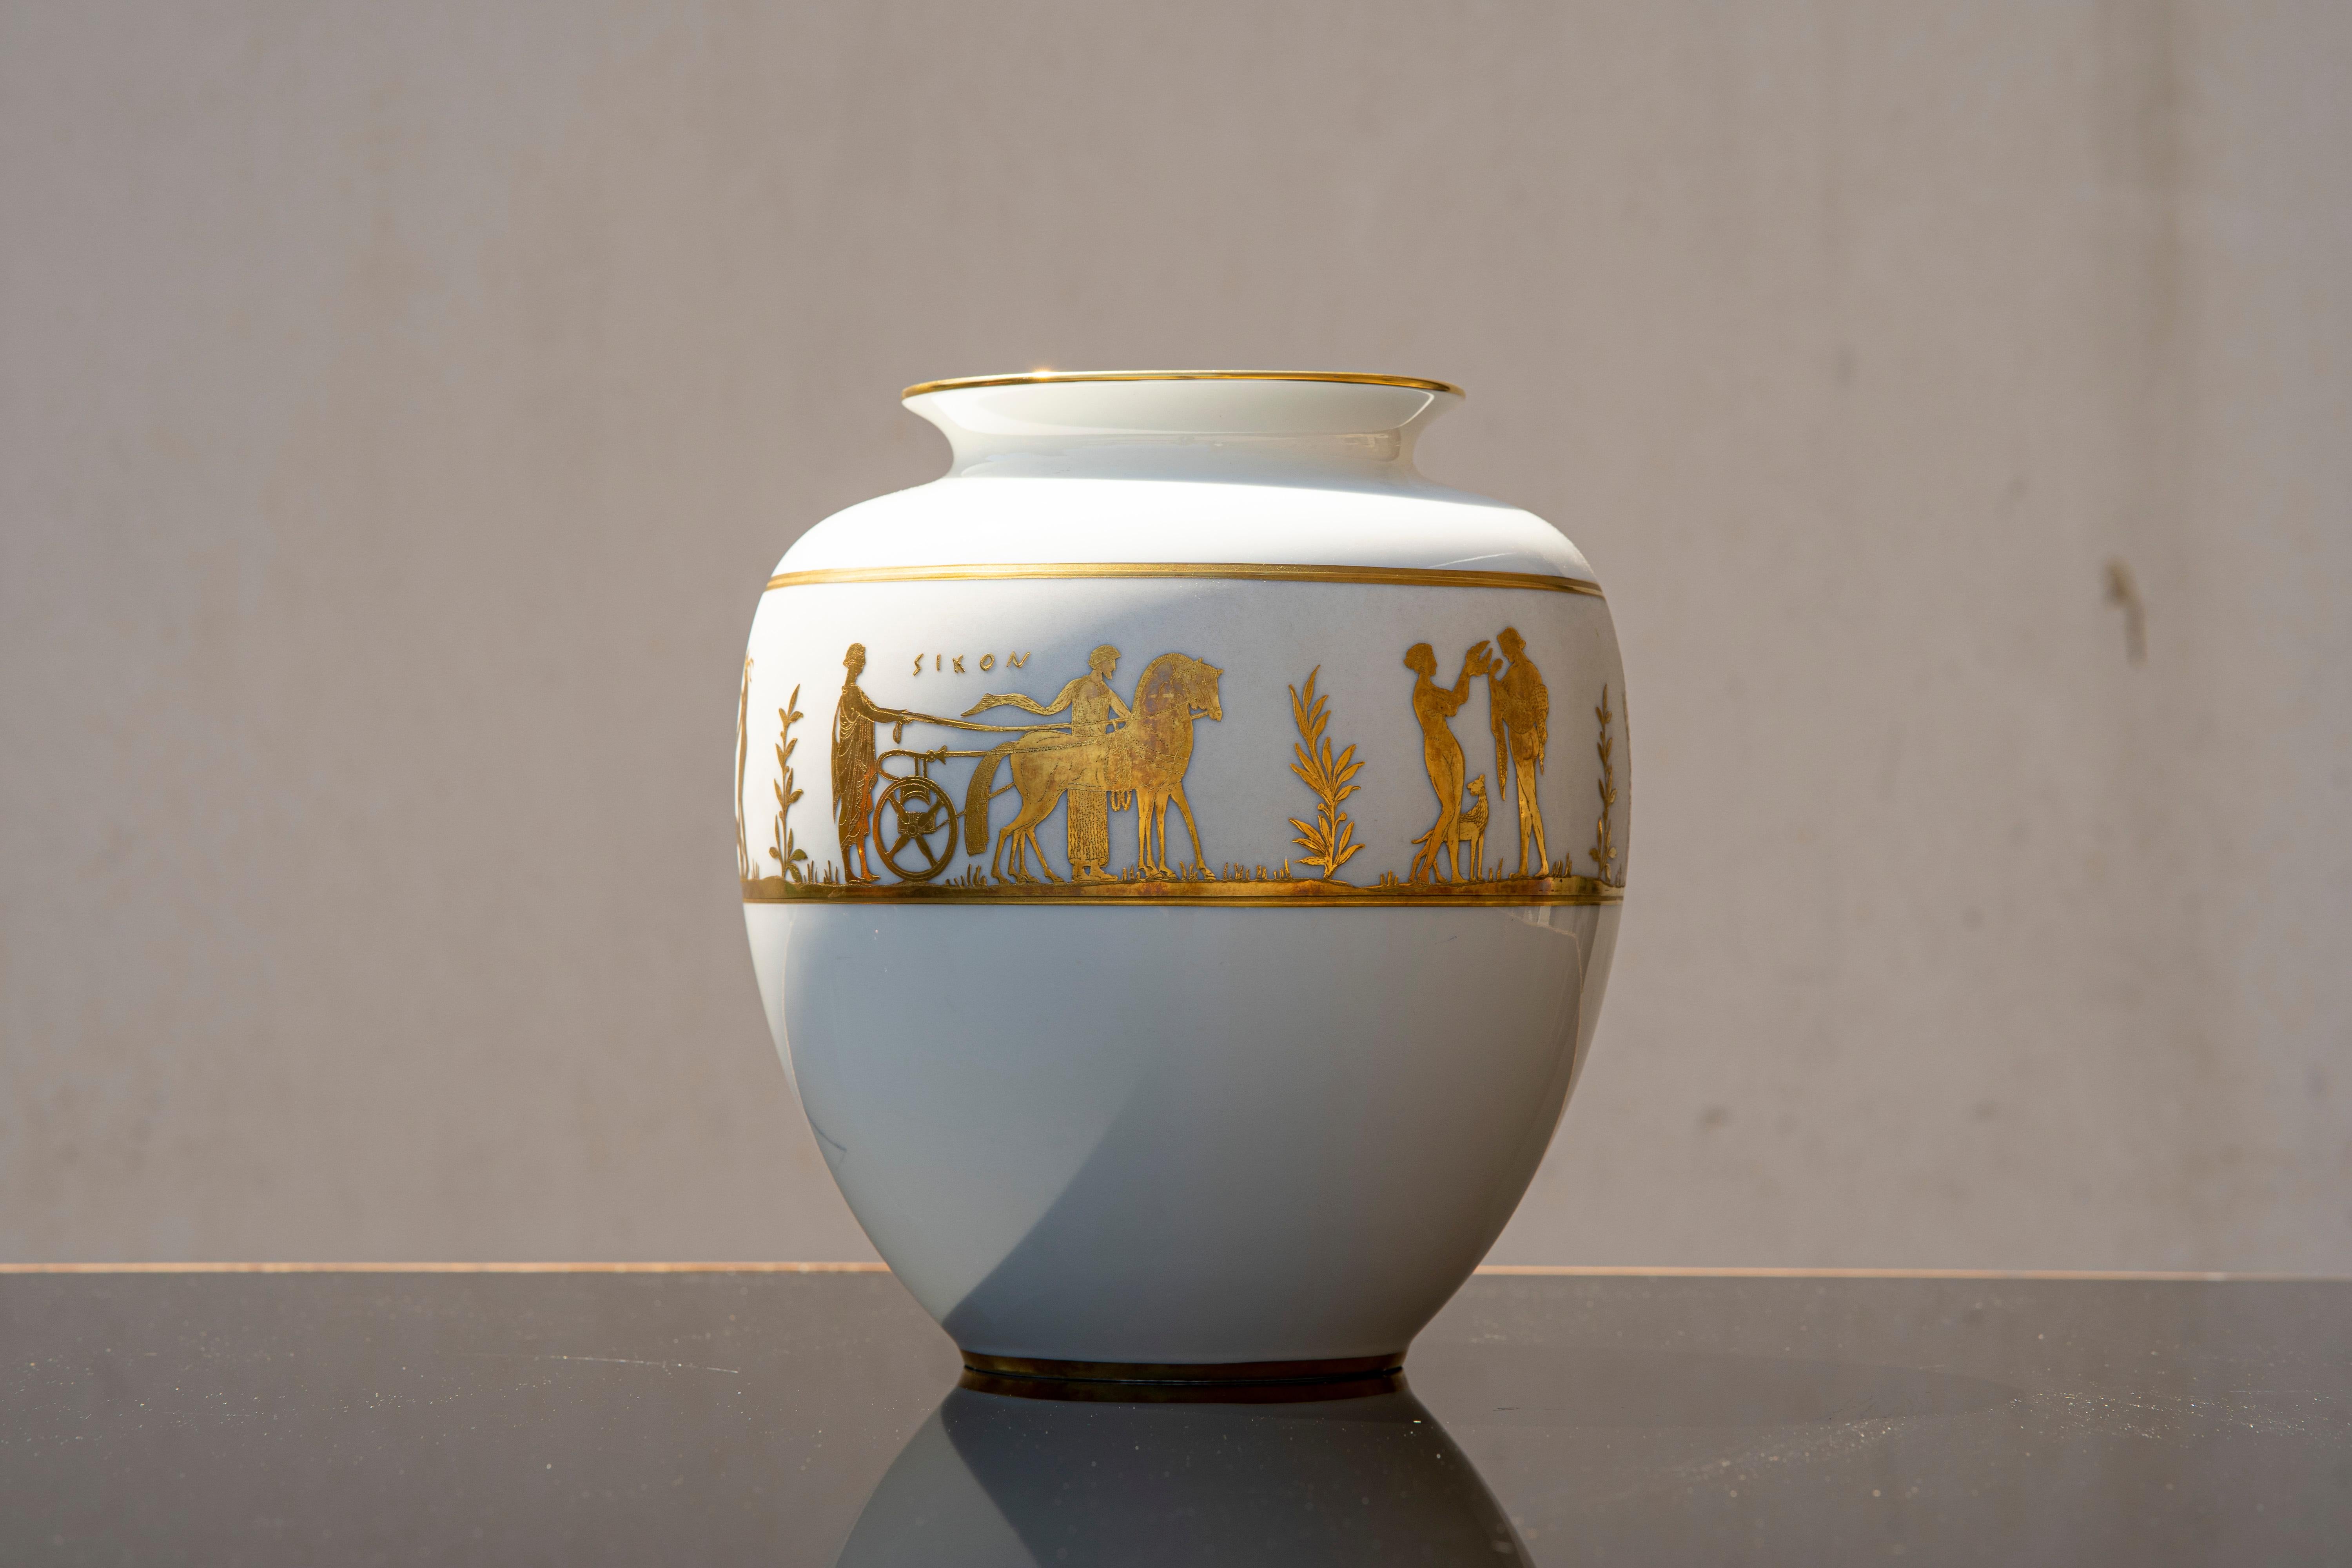 Neoclassical White Ceramic Vase with Gold Screen-Printing, 